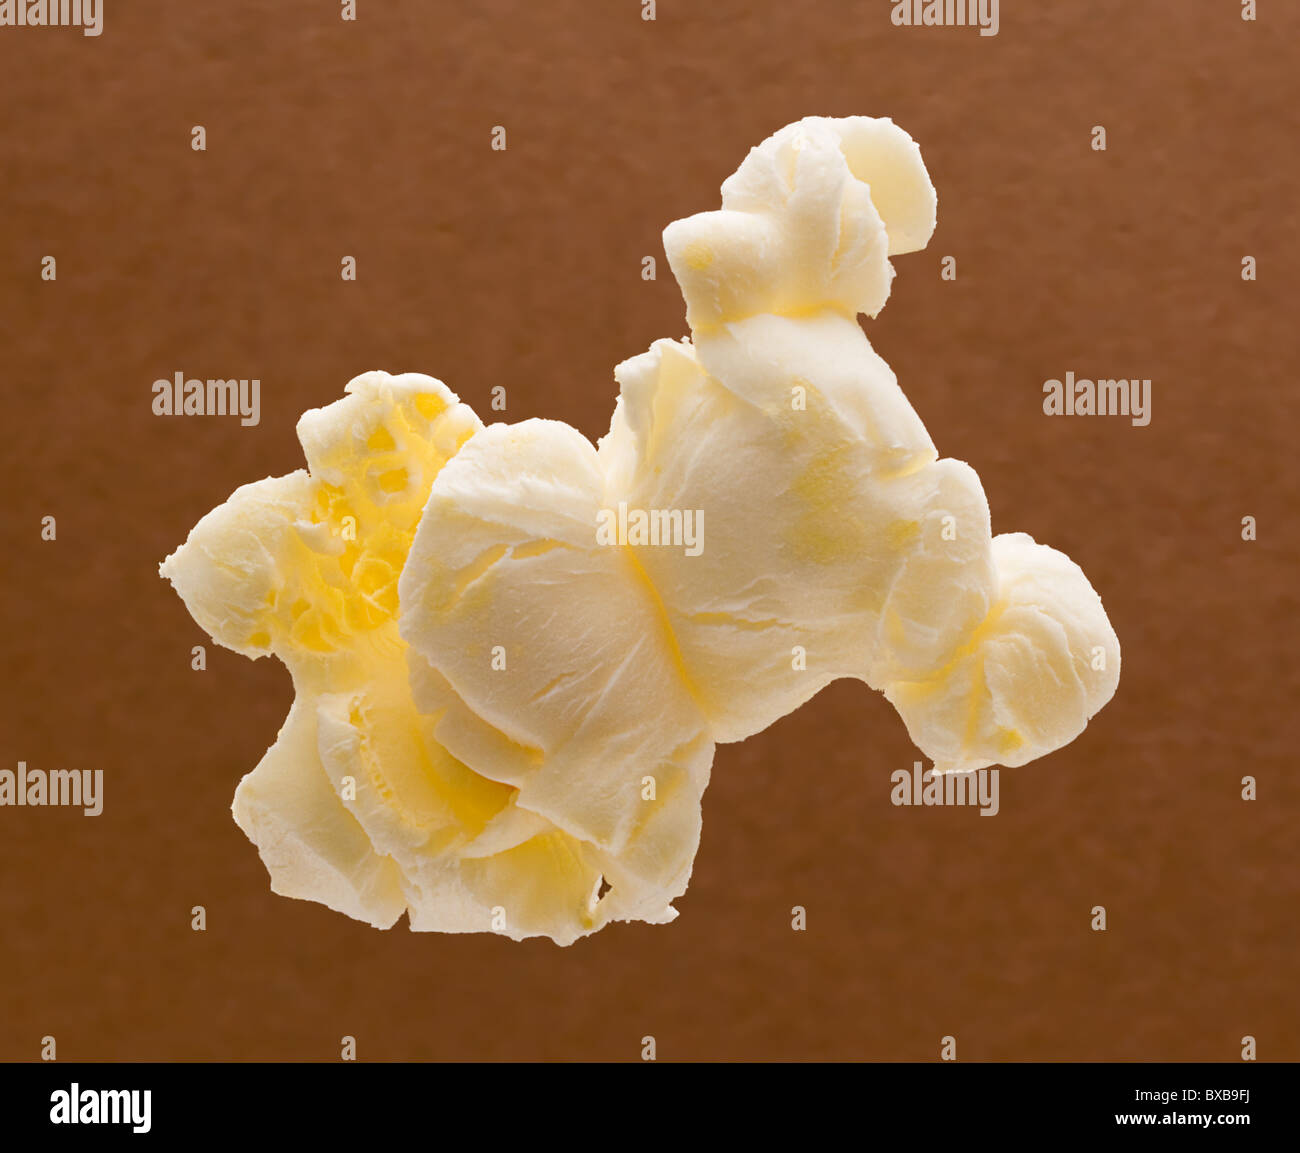 Popcorn isolated on a brown background Stock Photo